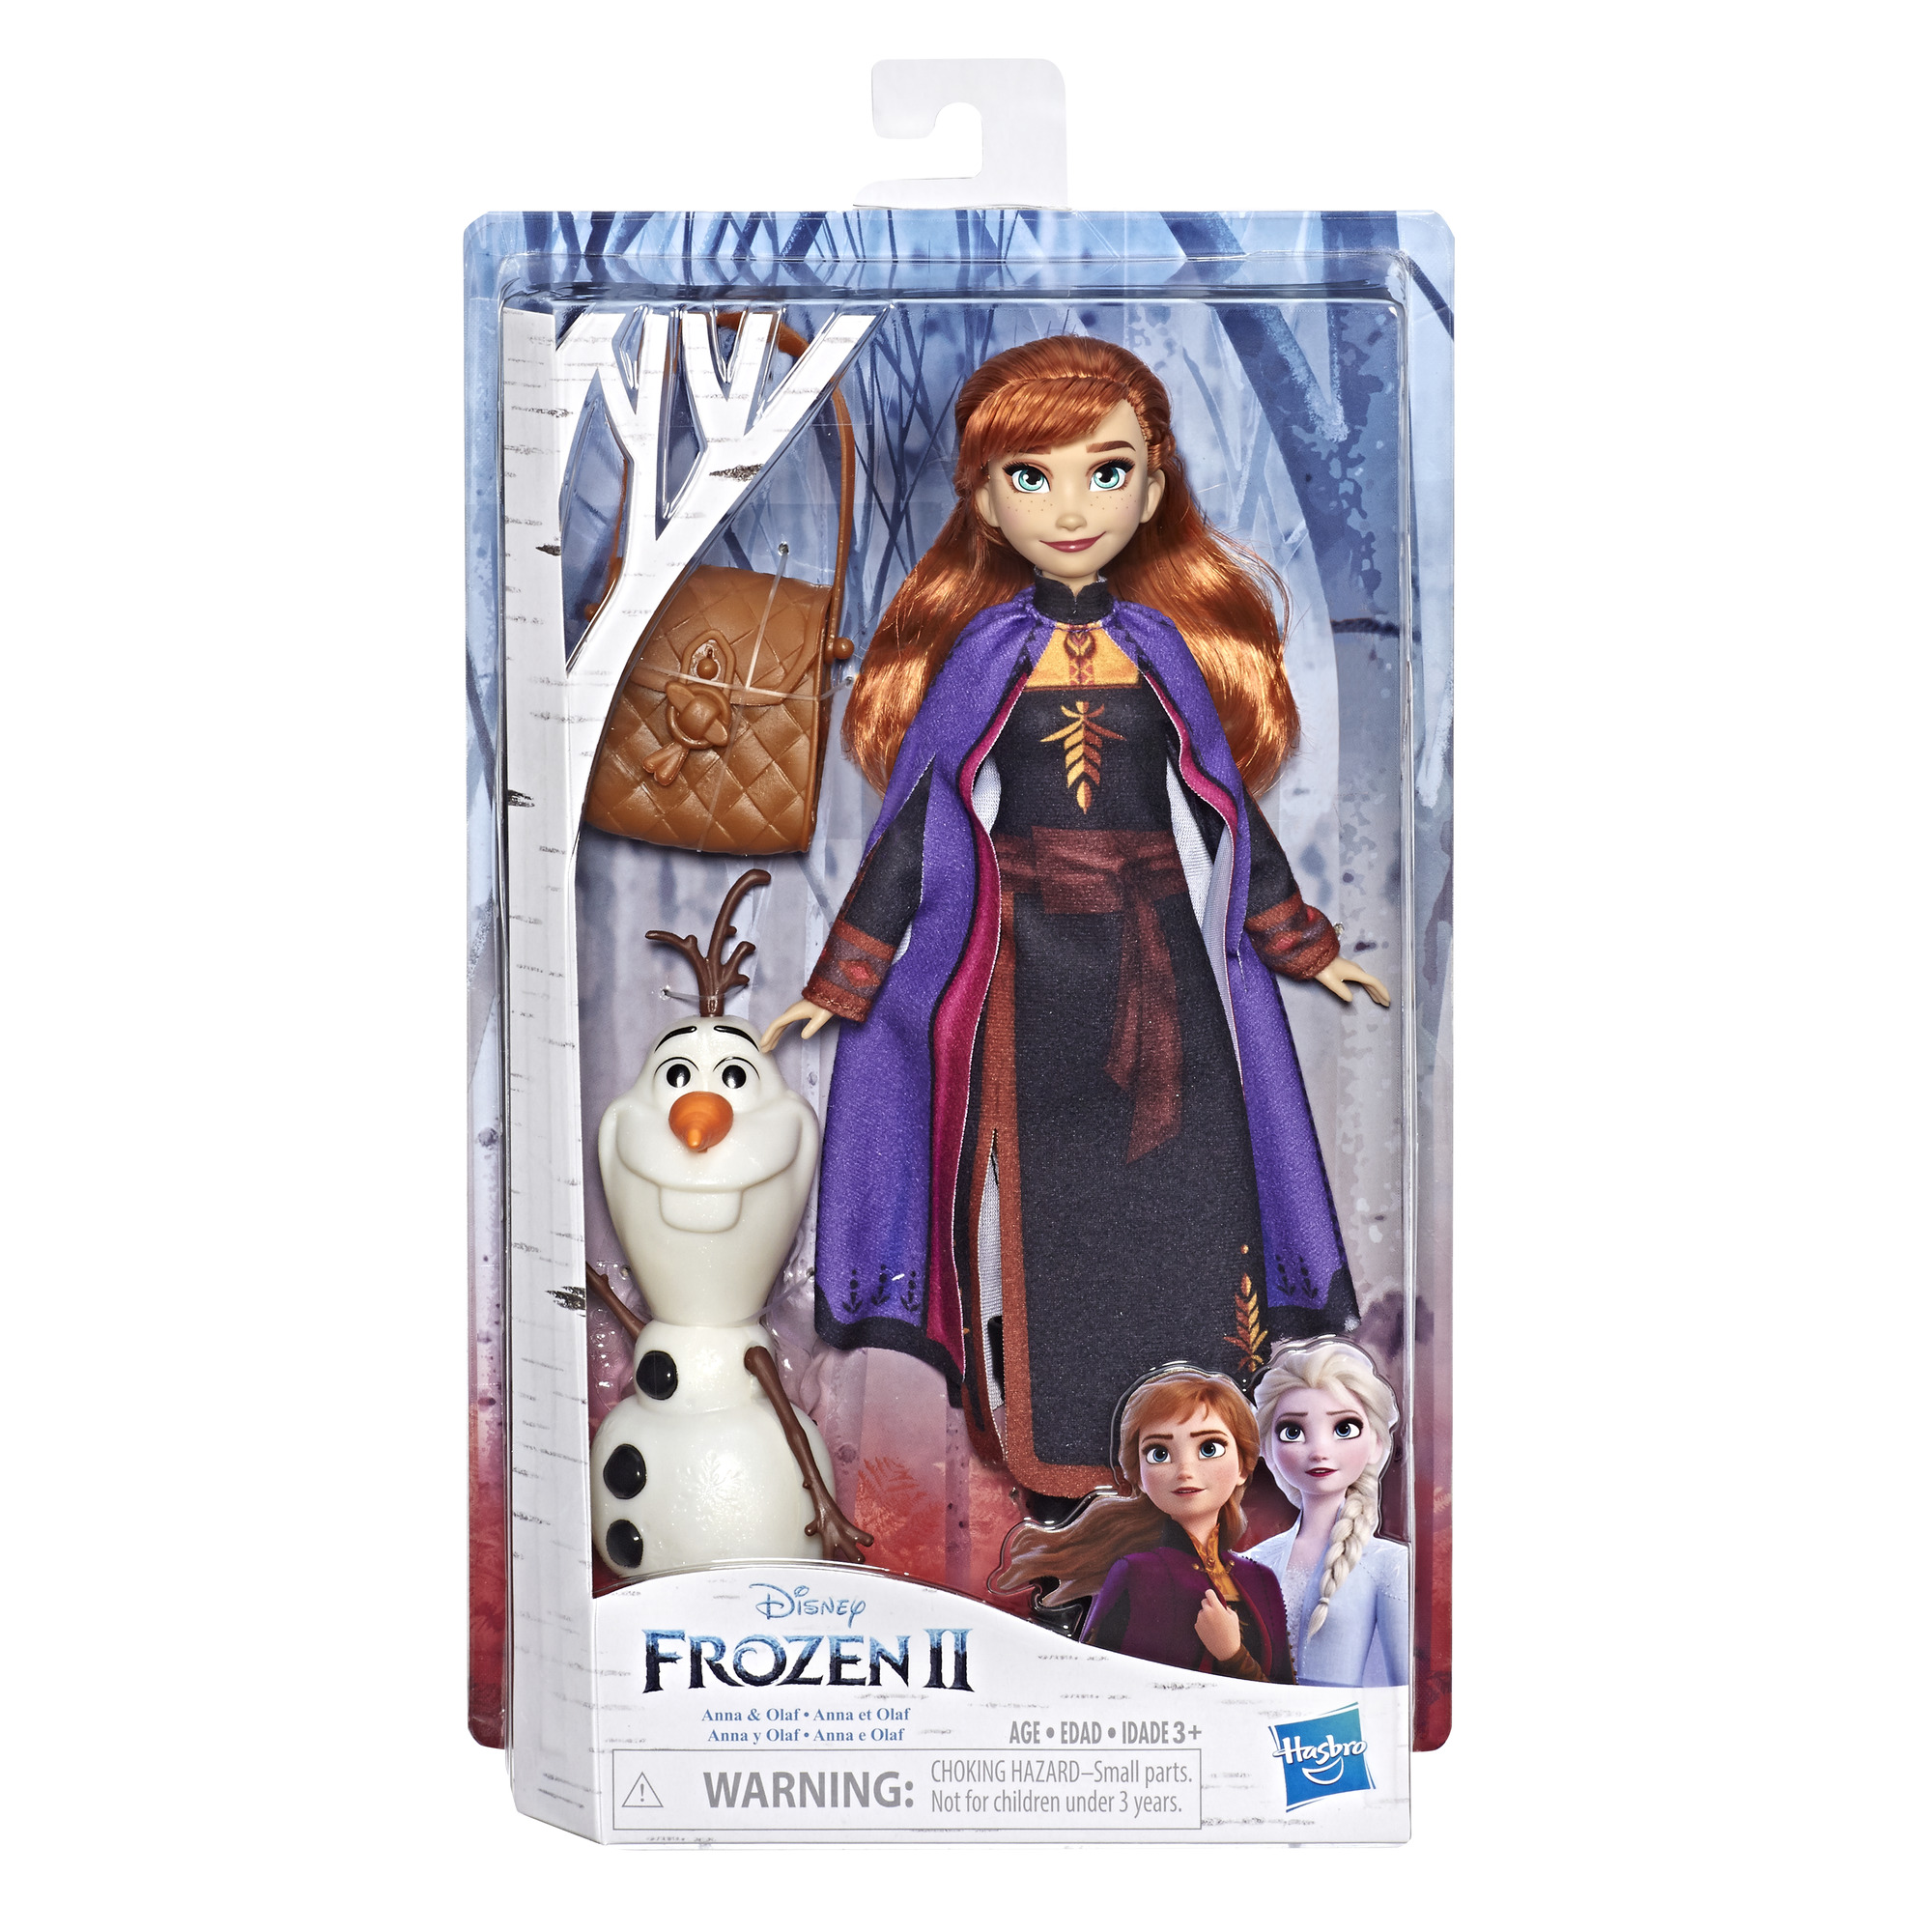 Disney Frozen 2 Anna Fashion Buildable Snowman Olaf Doll Playsets, Includes Doll And Olaf - image 2 of 2